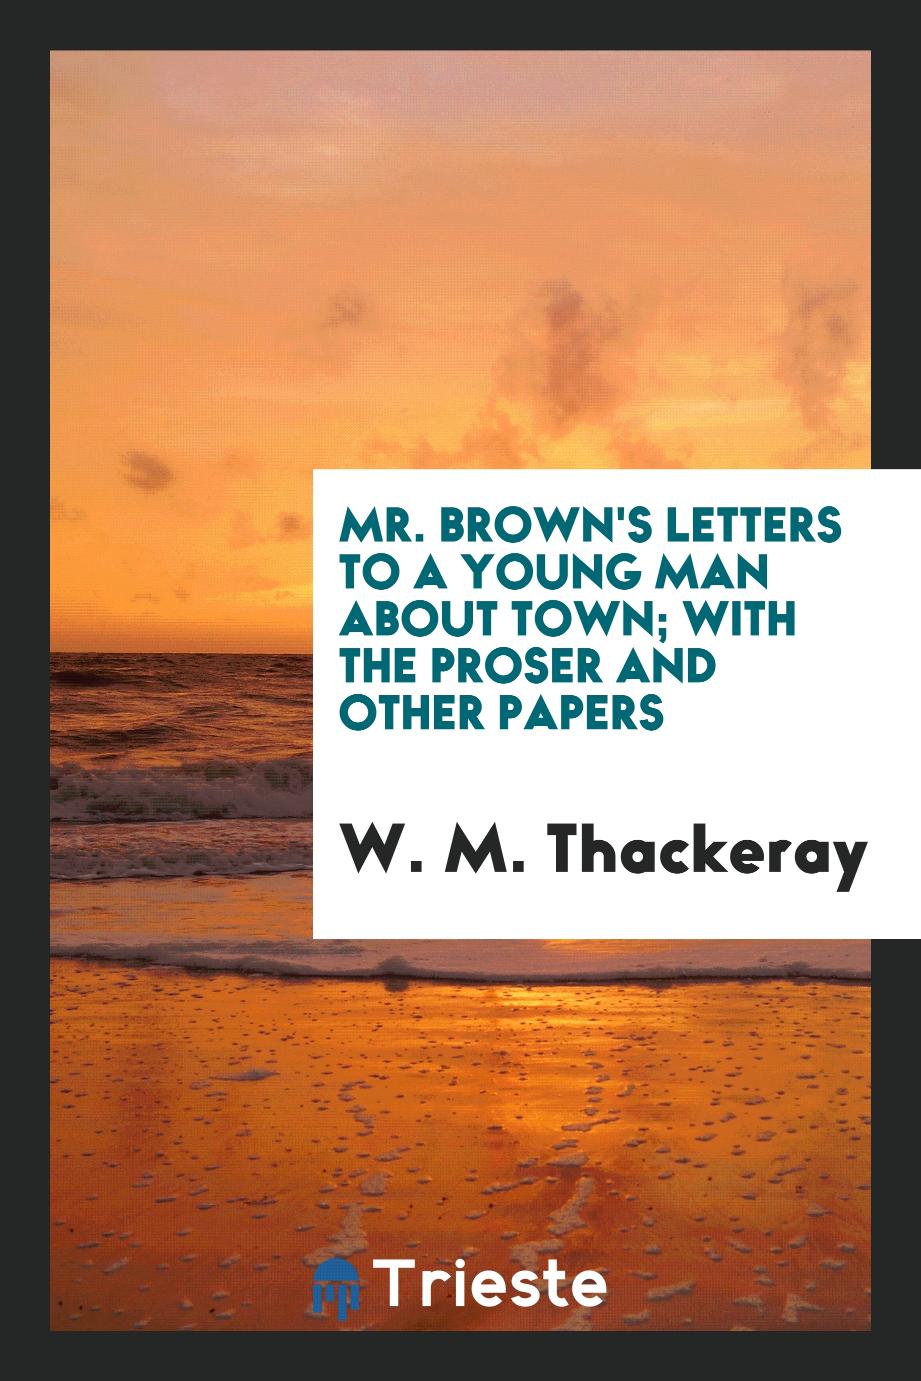 Mr. Brown's letters to a young man about town; with the proser and other papers